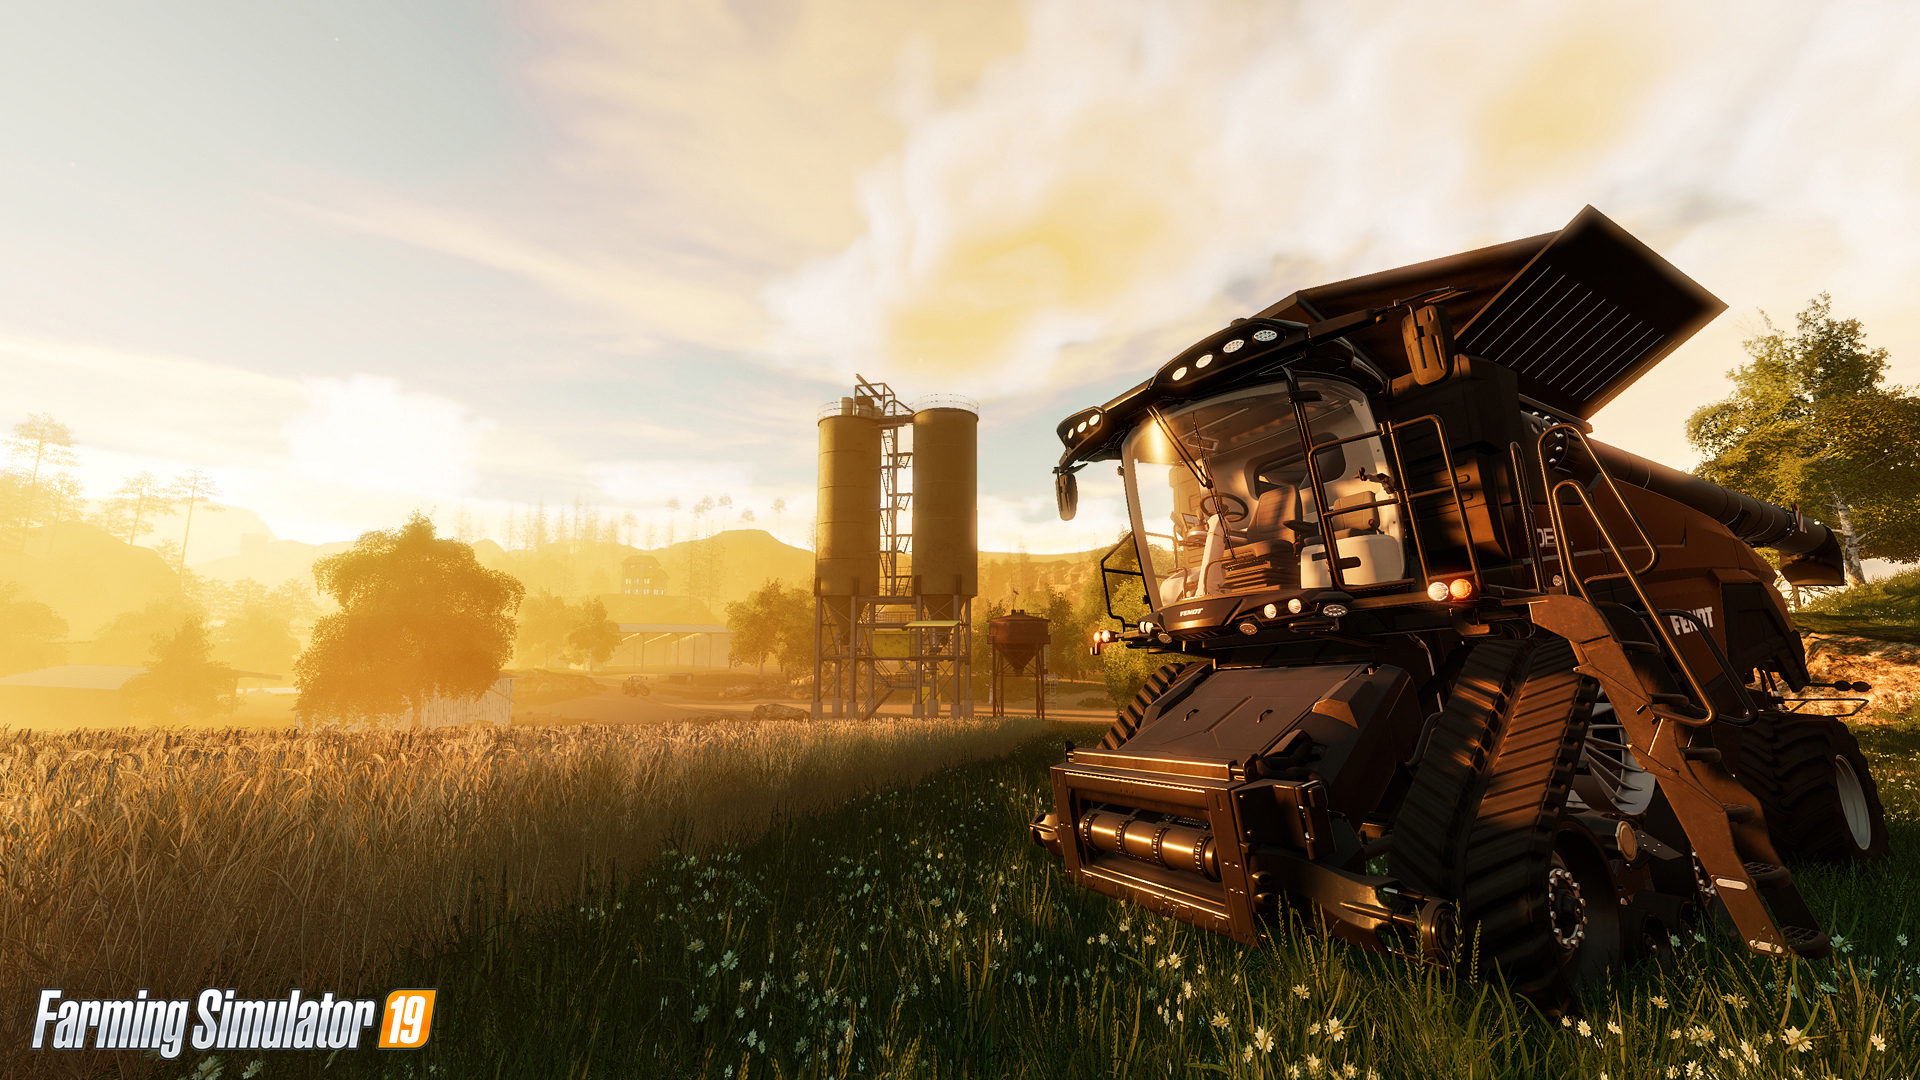 Pictures of Farming Simulator 19 to be released this November 11